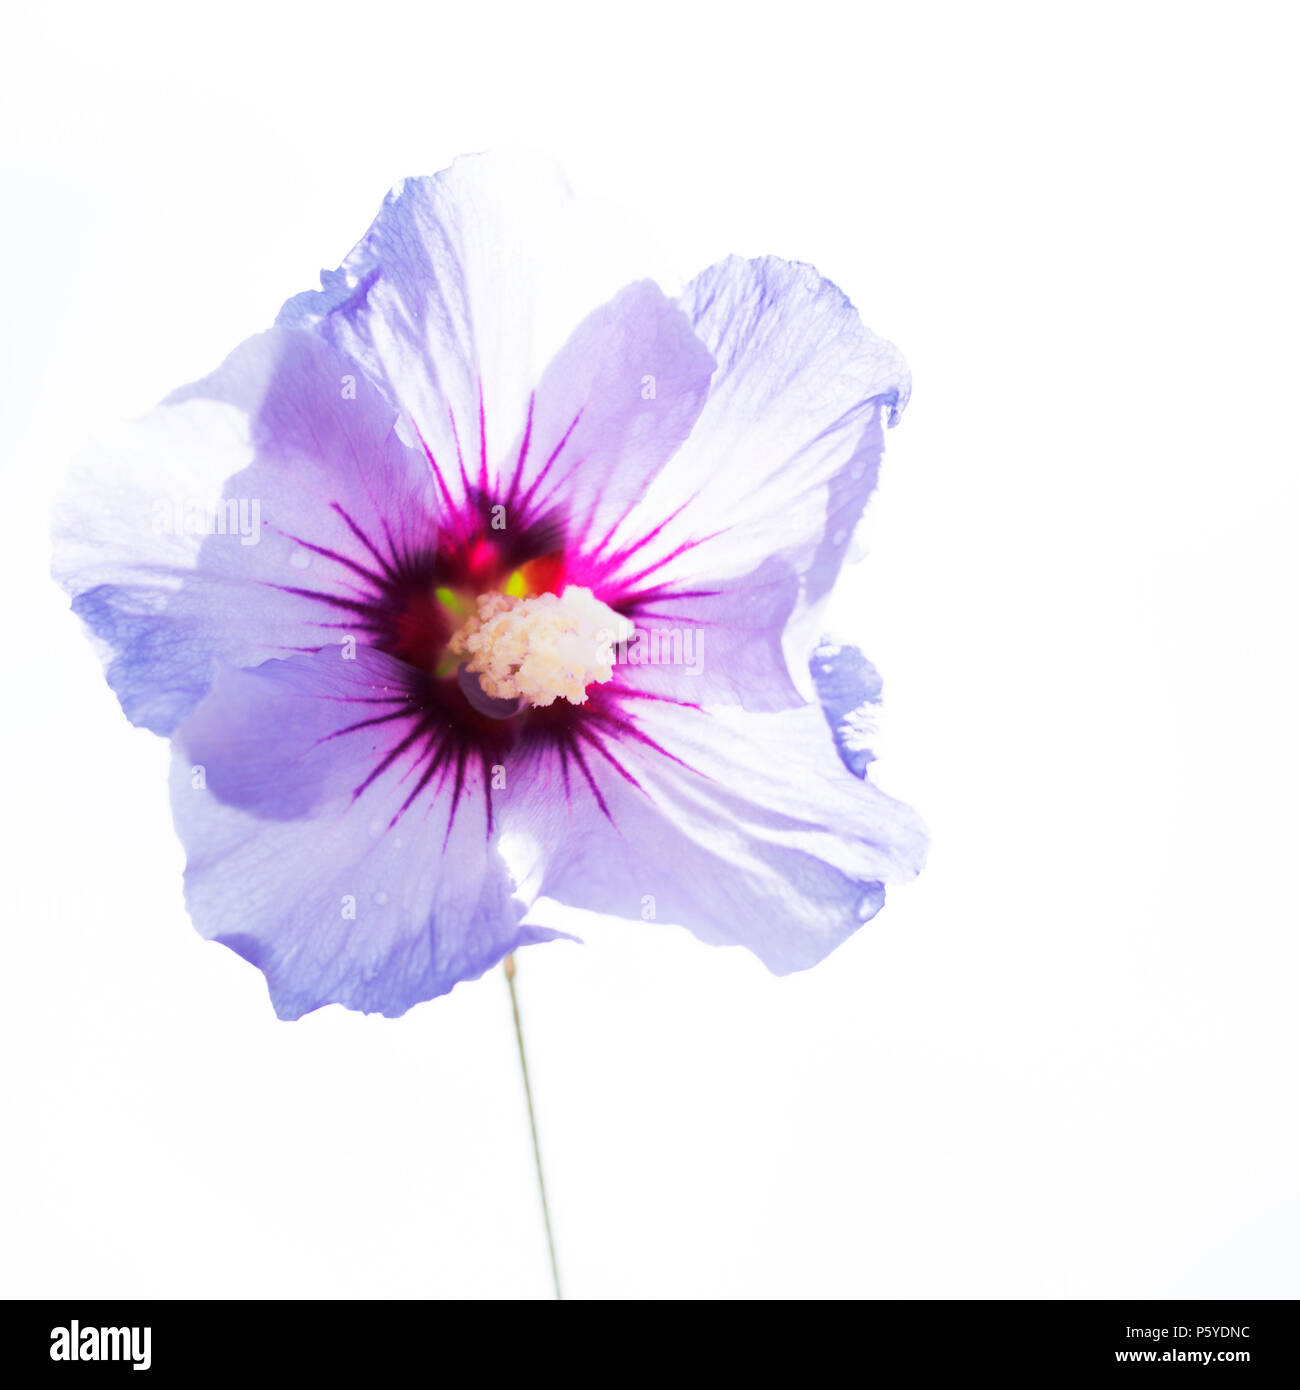 Close up of a single beautiful isolated purple hibiscus flower, or rose mallow, full of details, photographed in high key with white backgound Stock Photo